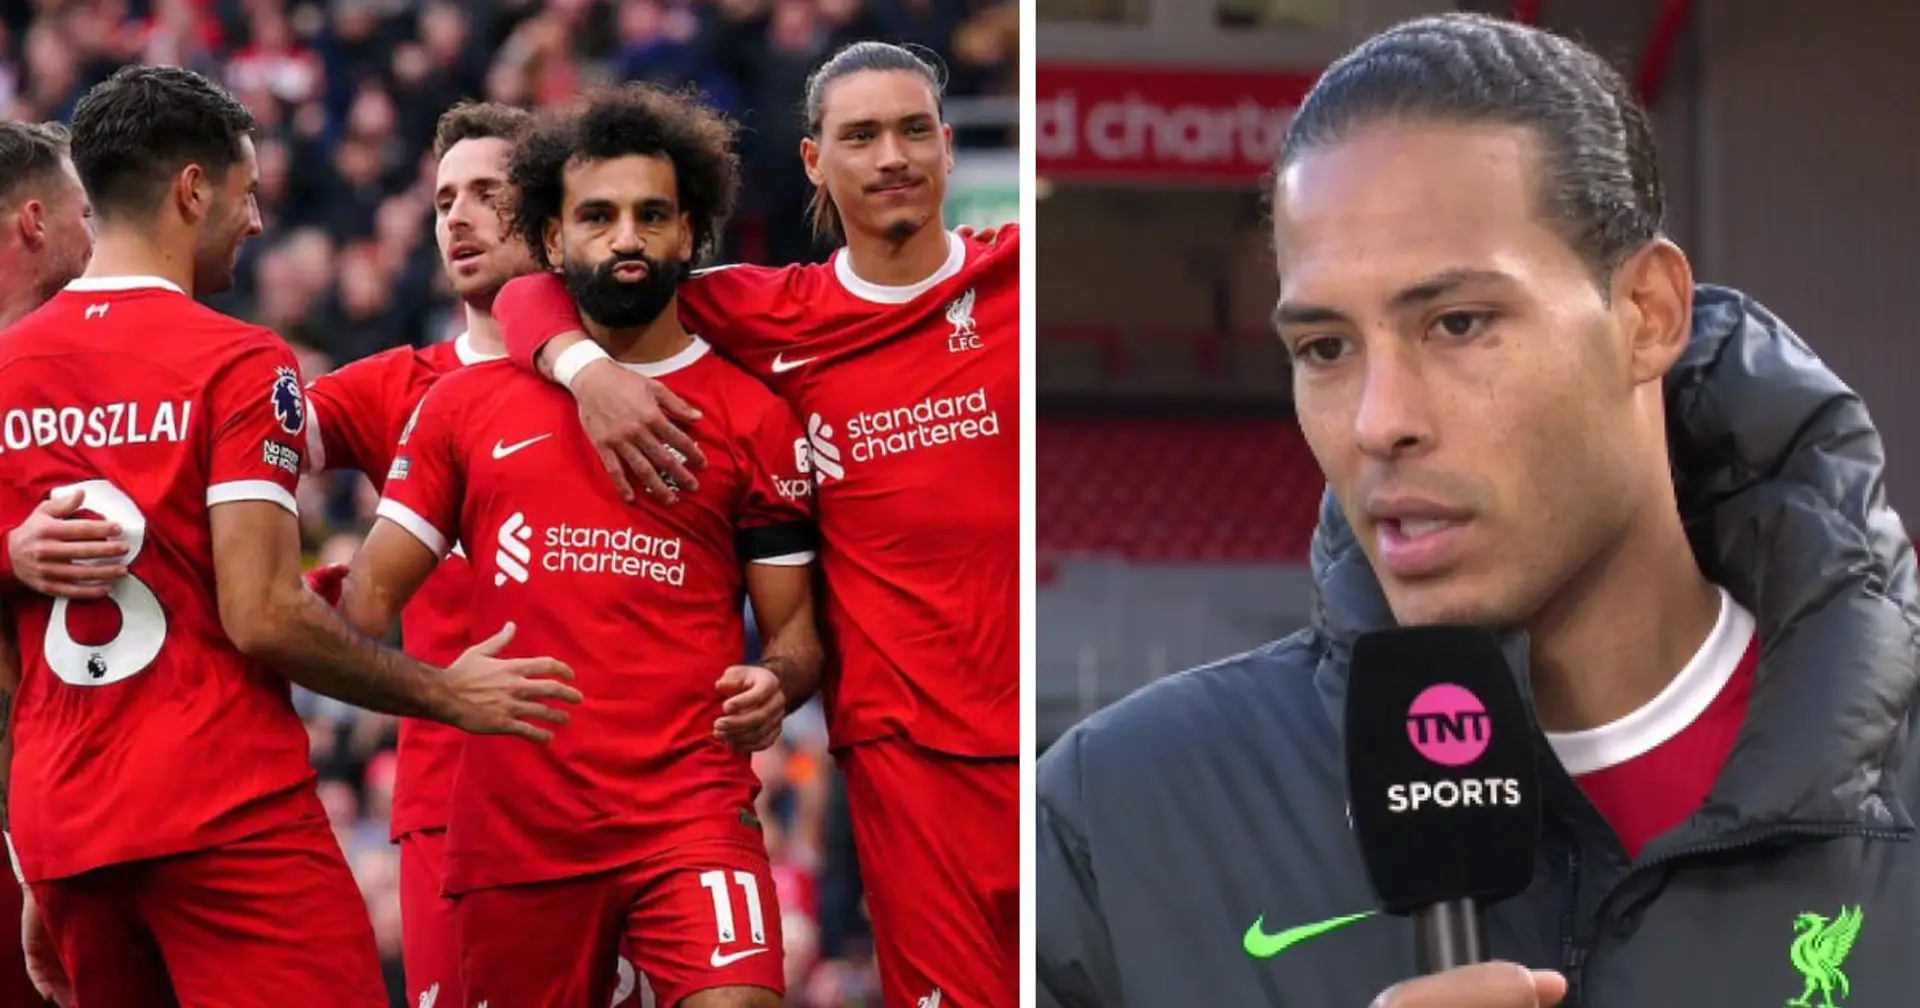 Virgil van Dijk names one Everton player who did very well against Liverpool